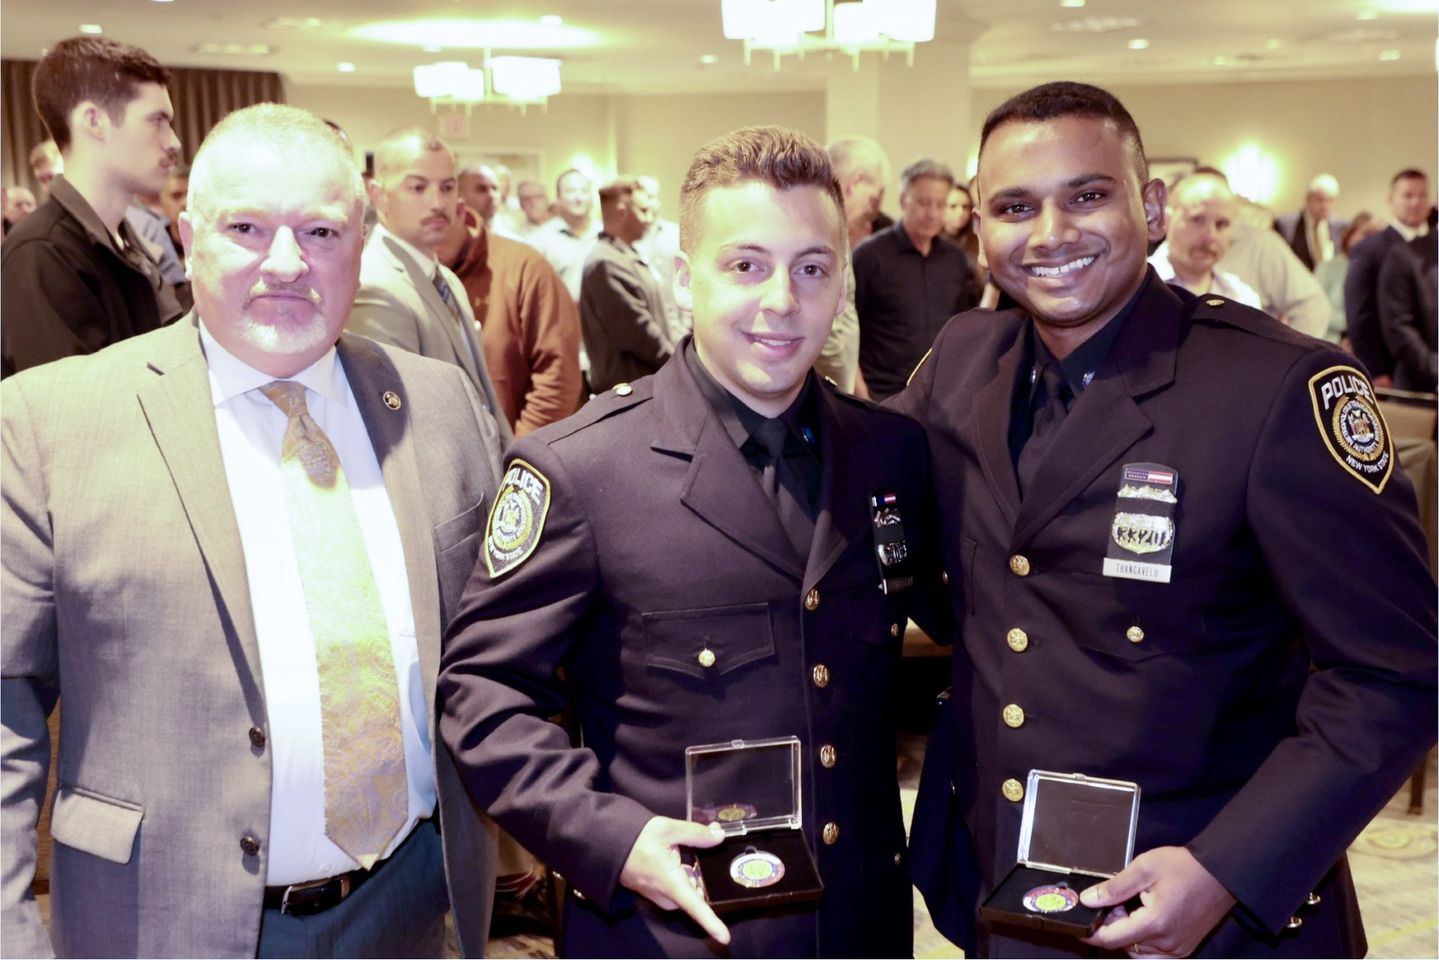 MTA Officers Awarded Medal of Valor for Heroic Act